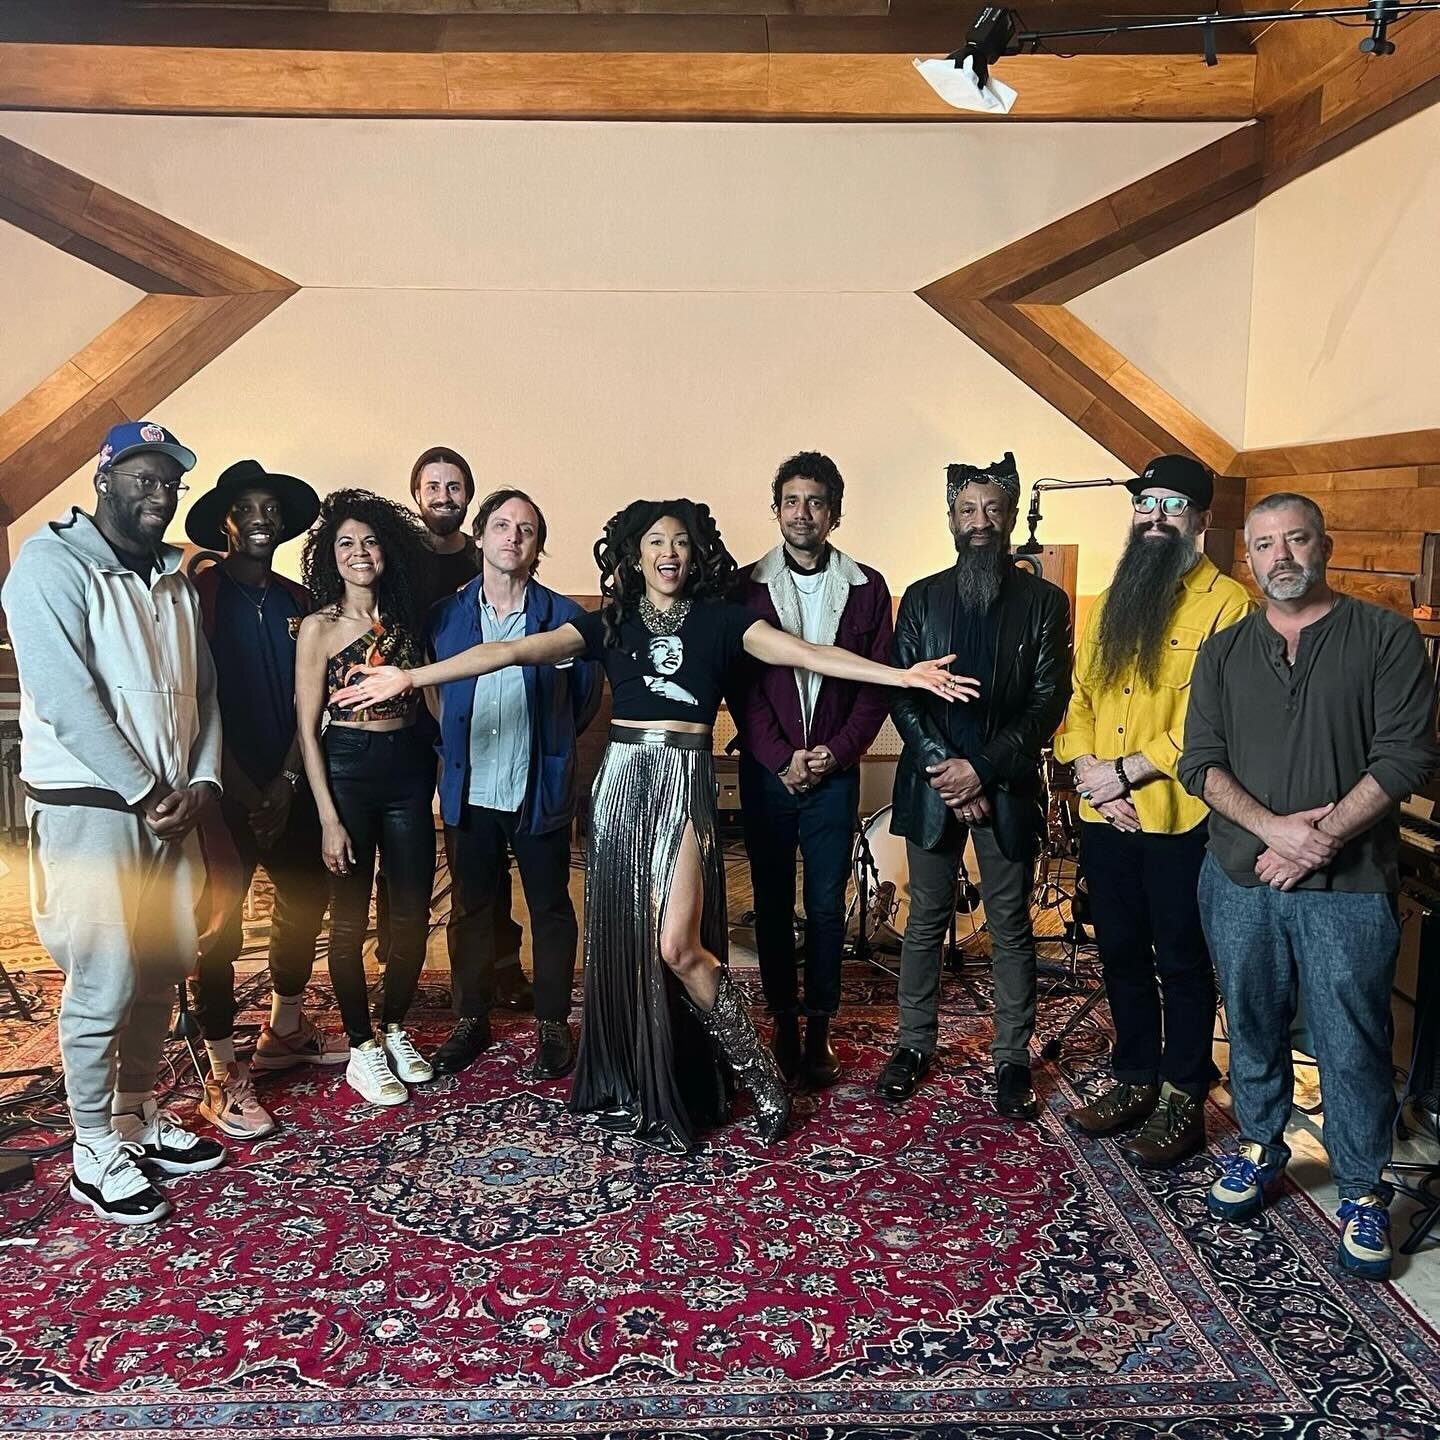 So thrilled to be performing with @valeriejune today on @thekellyclarksonshow with this incredible band!

Valerie June, thank you for inviting me into your world. You are truly magic. Congratulations on being part of this beautiful album. ✨💫&hearts;